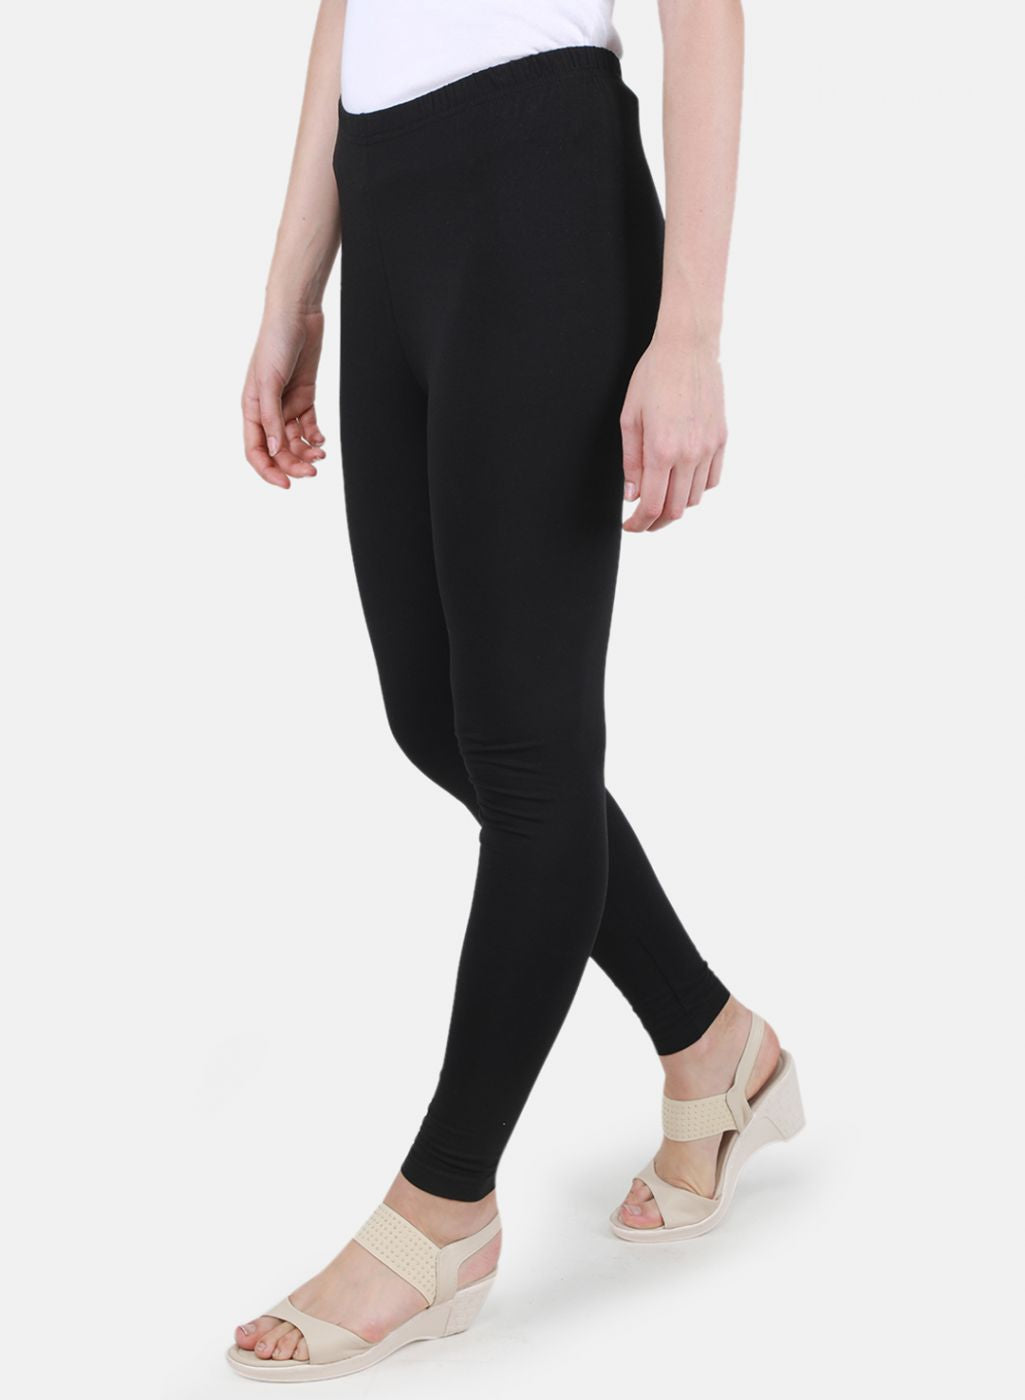 joggers vs leggings - which is better for you? – aastey